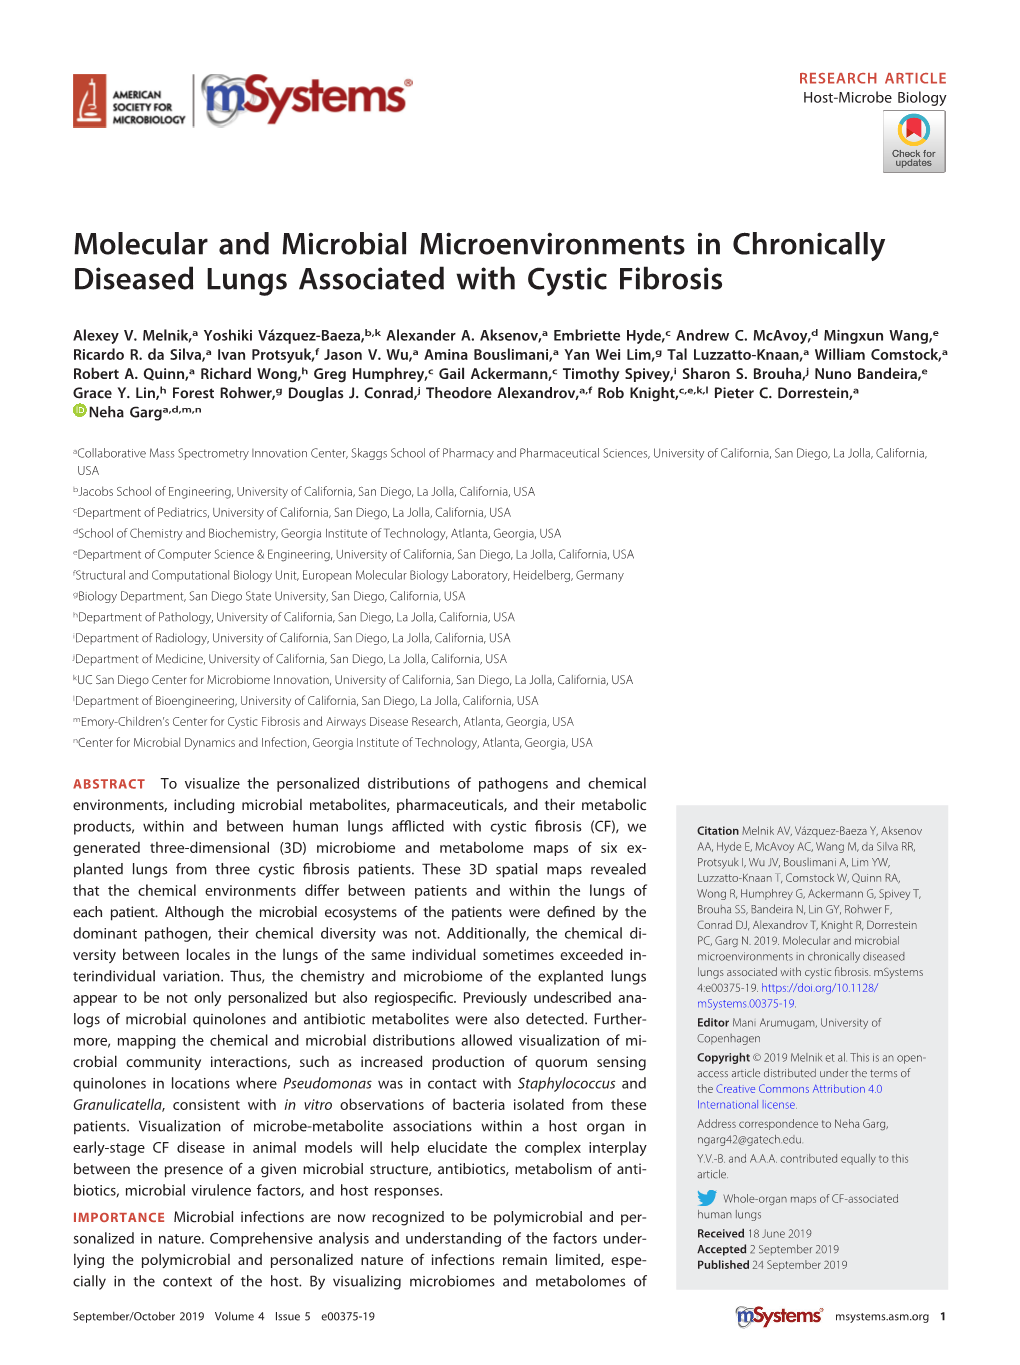 Molecular and Microbial Microenvironments in Chronically Diseased Lungs Associated with Cystic Fibrosis